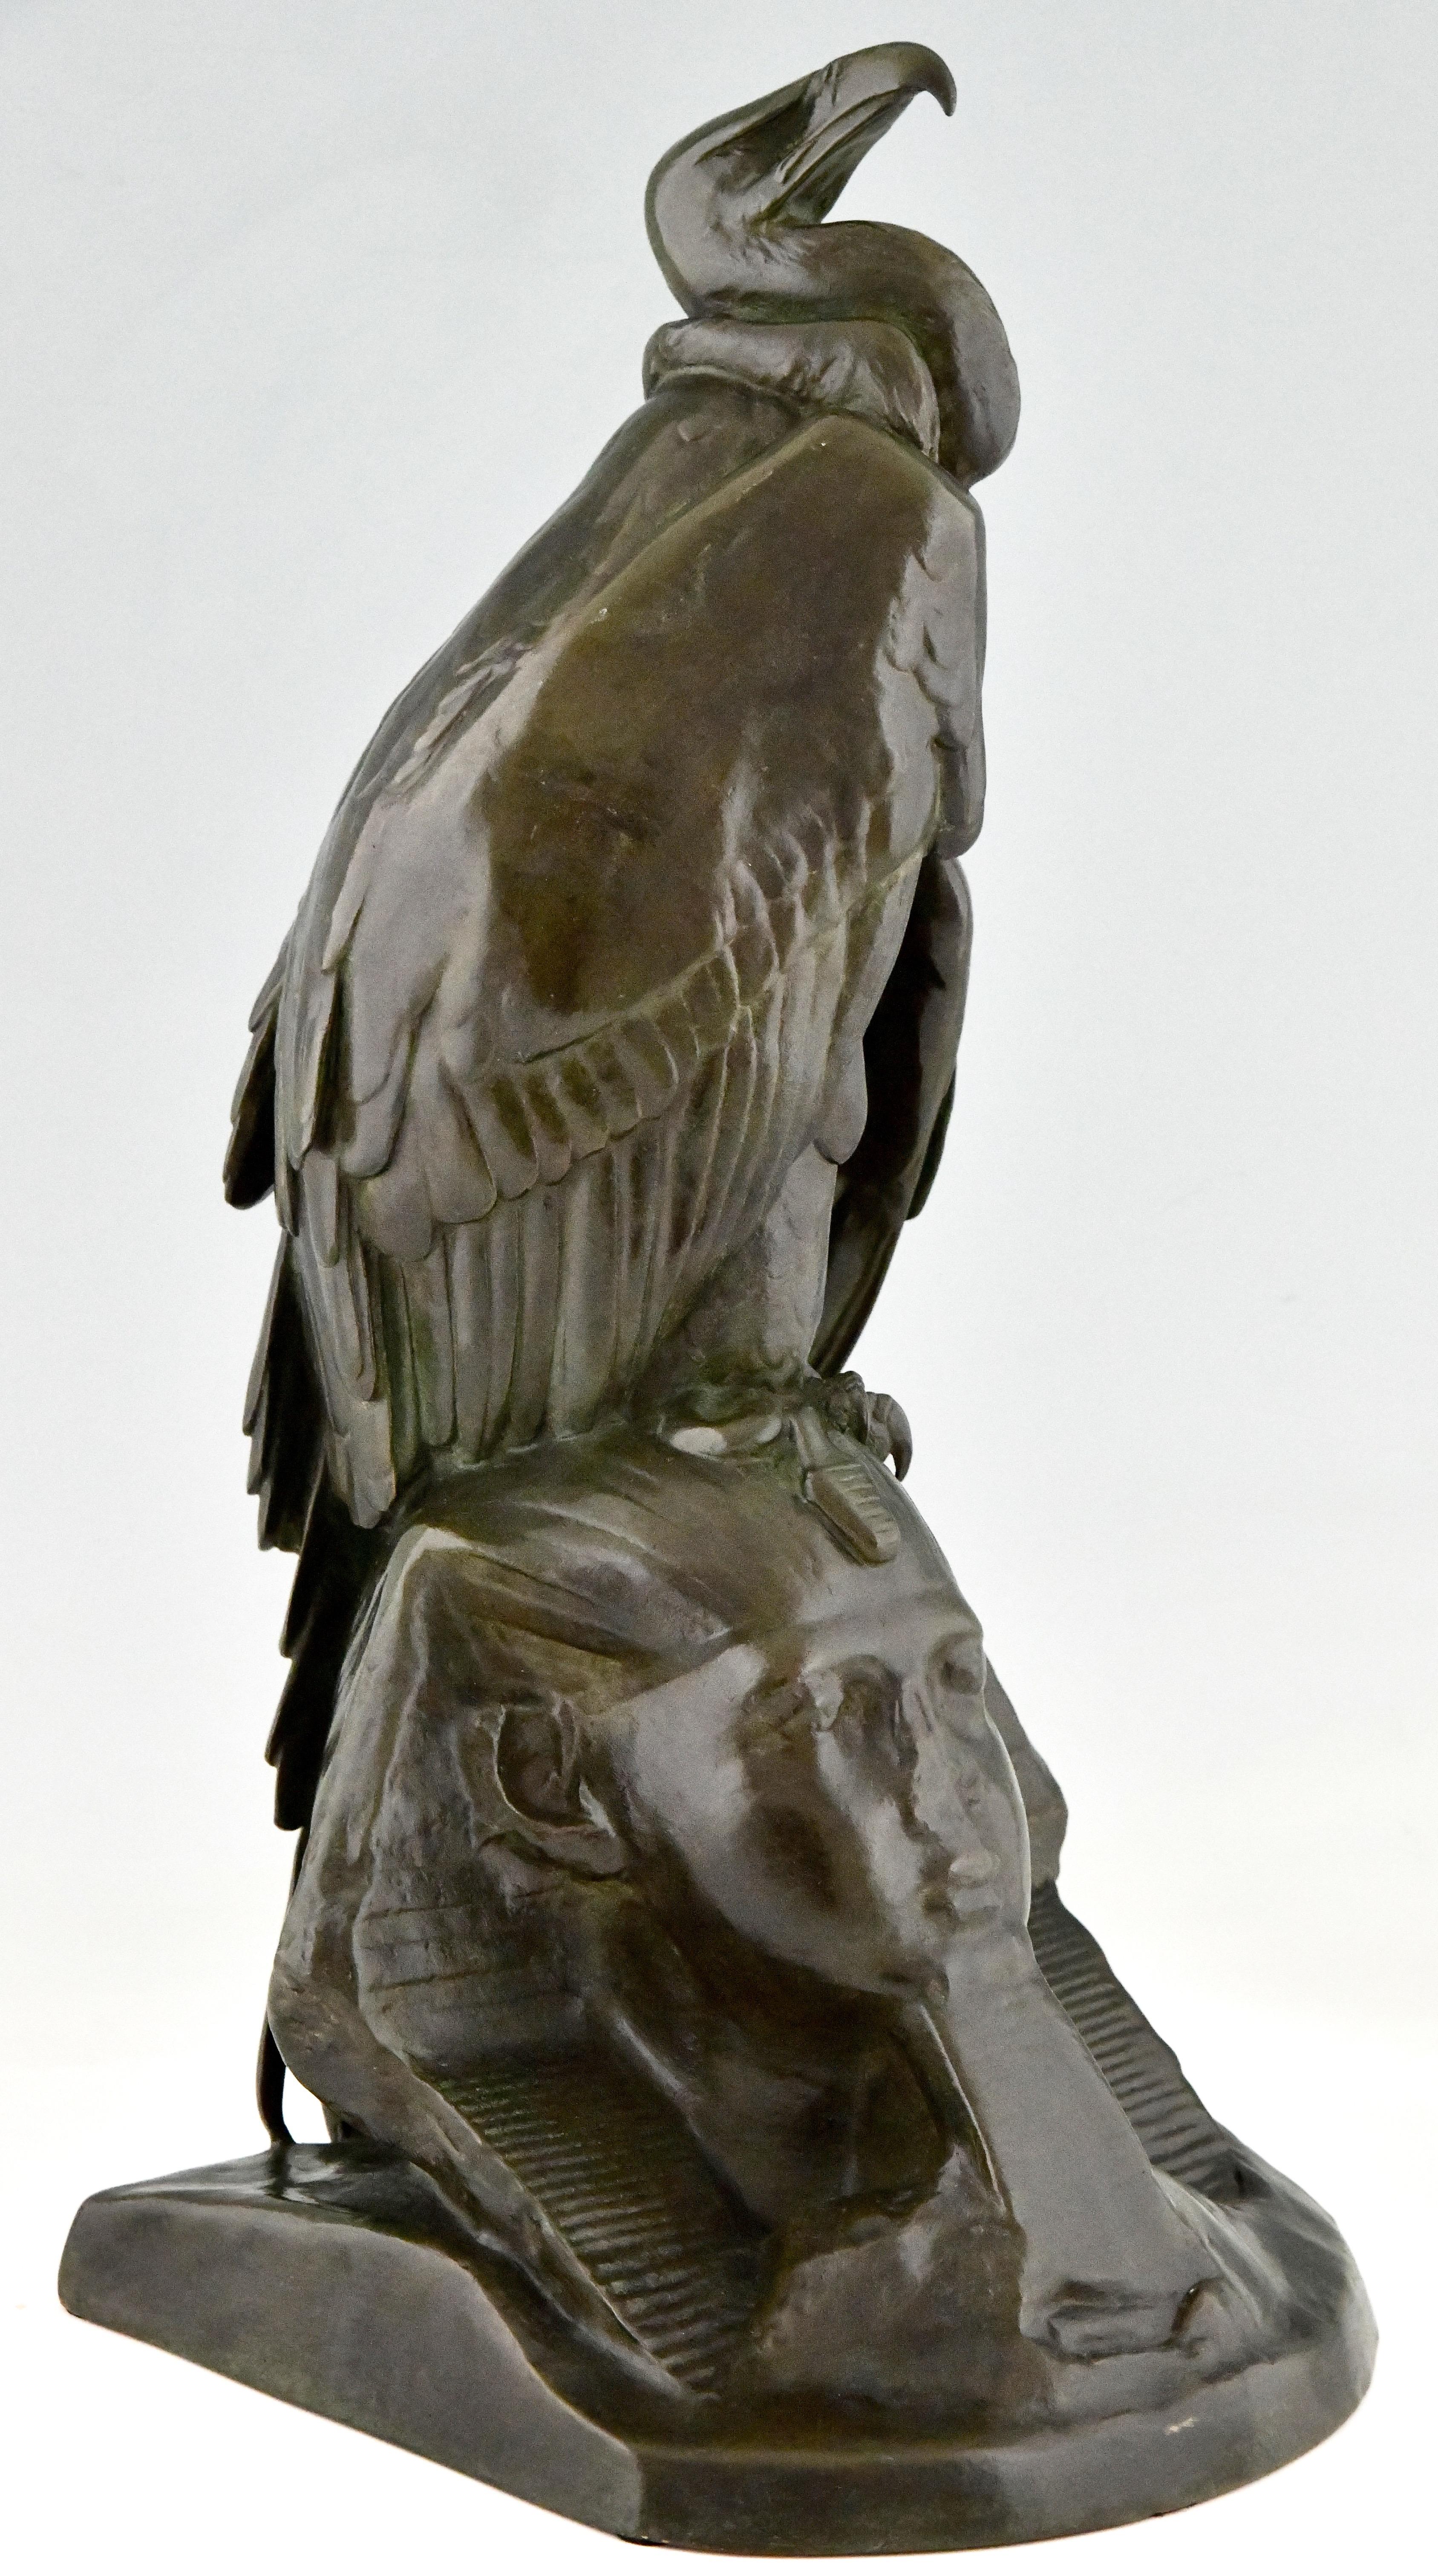 Antique bronze sculpture of a vulture on a sphinx by August Nicolas Cain. Modelled for an exhibition in France in 1851. 
This model is illustrated in Bronzes, sculptors and founders by H. Berman, Abage and in Les bronzes de XIXe siècle by Pierre